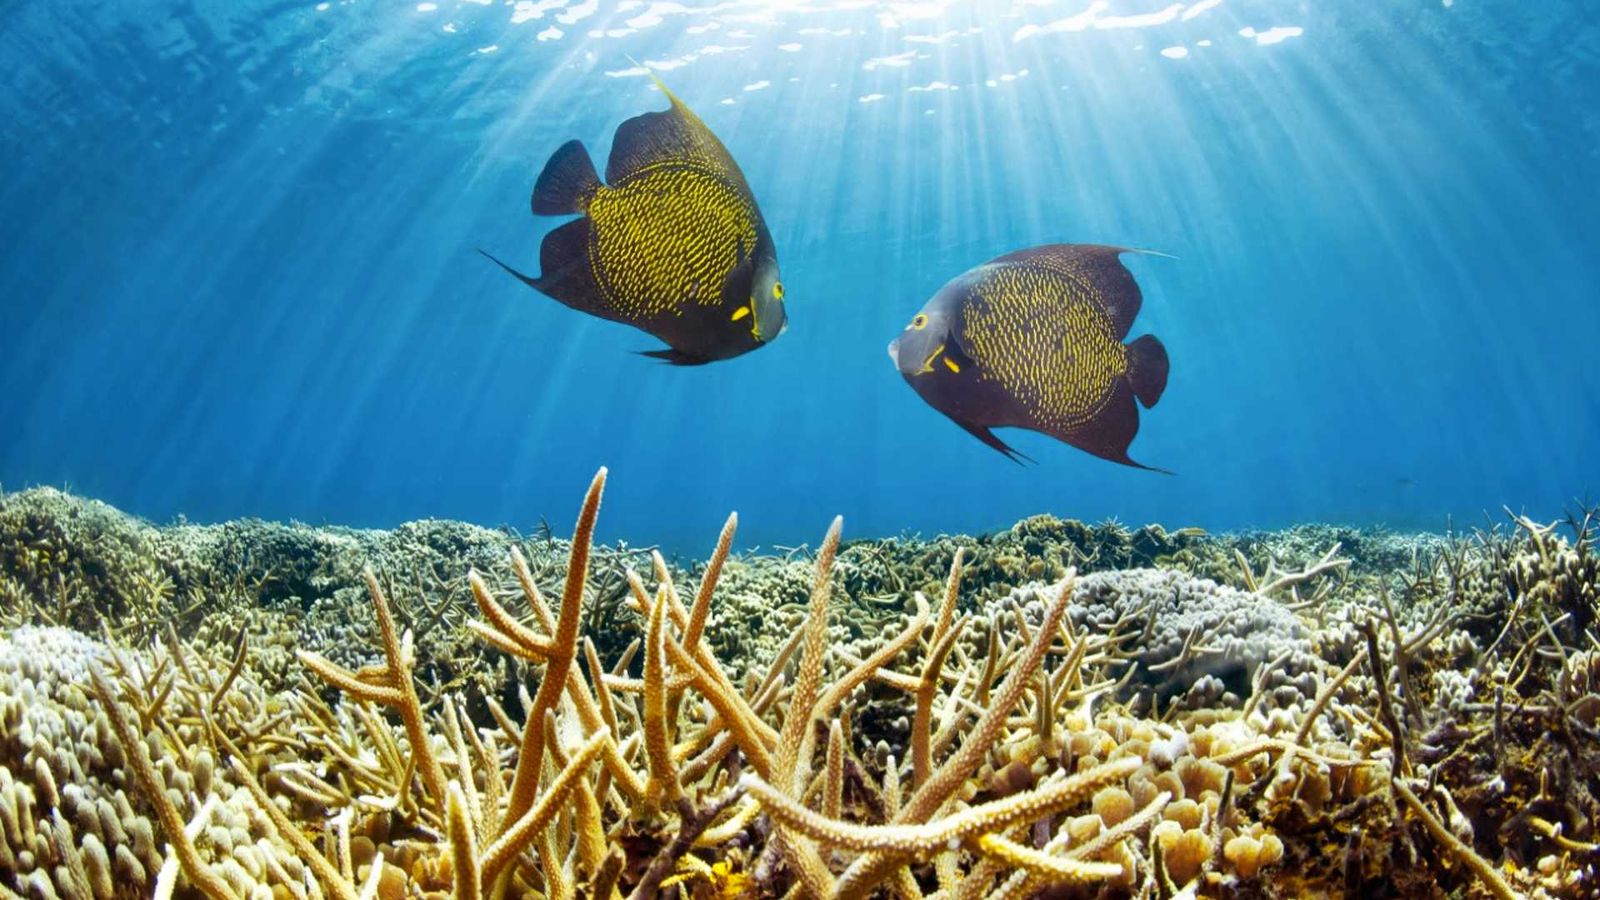 A coral reef underwater with two fish swimming nearby.